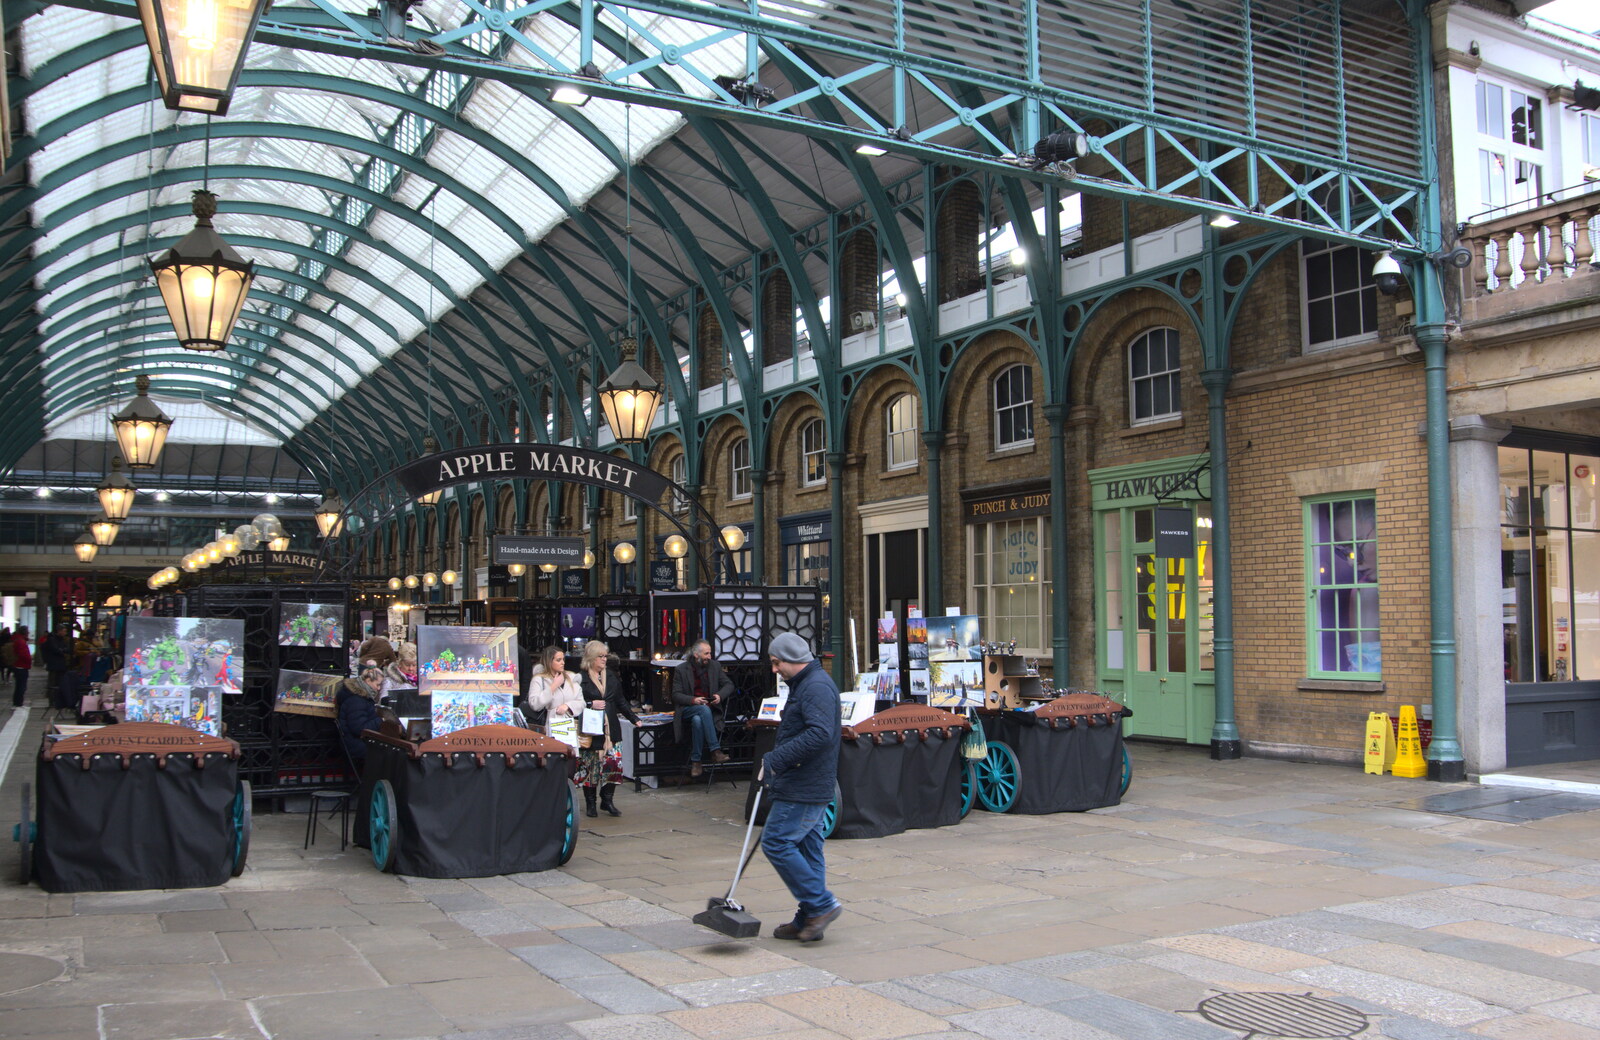 Covent Garden's Apple Market from A SwiftKey Memorial Service, Covent Garden, London  - 13th March 2020